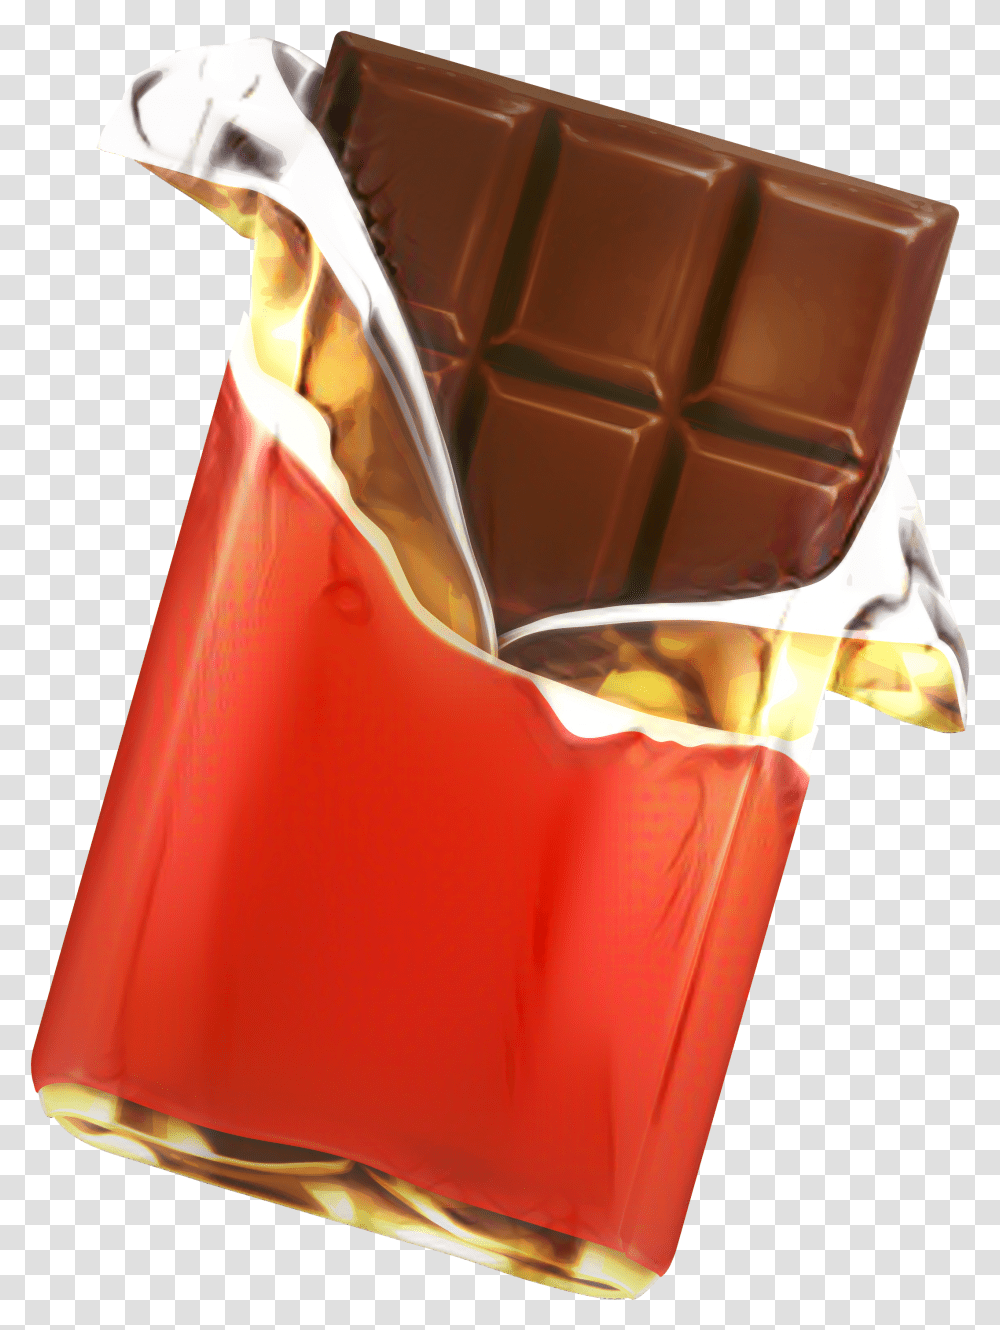 Chocolate Bar White Chocolate Clip Art Candy Background Chocolate Bar Clipart Transparent Png